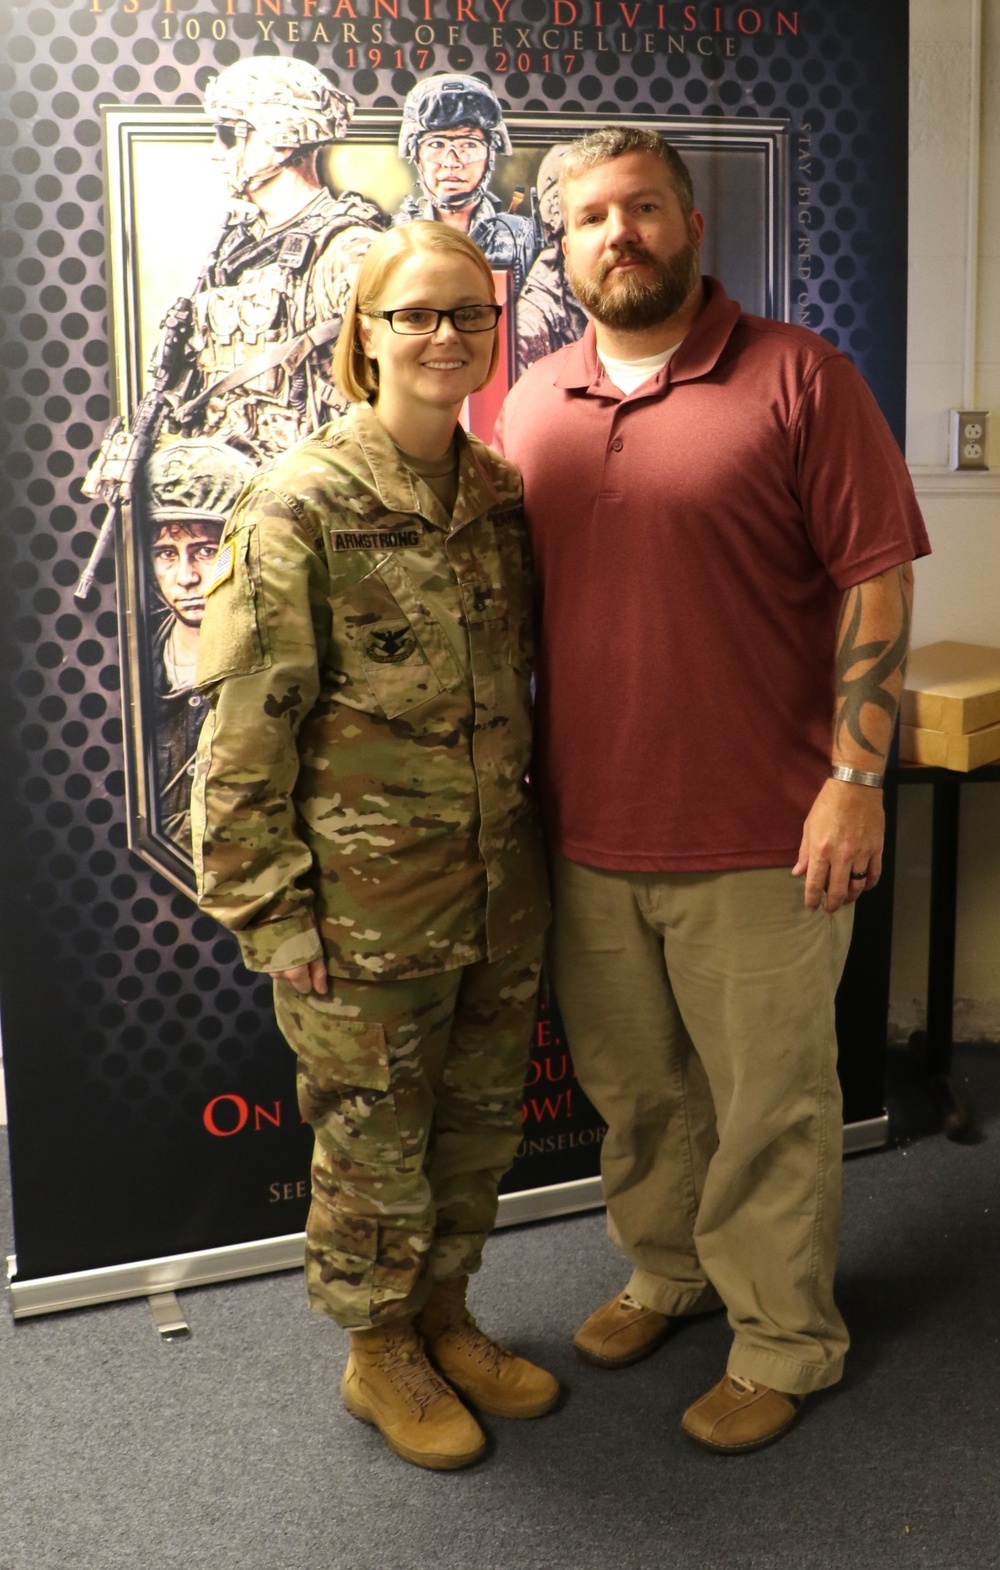 Staff Sgt Armstrong and Husband